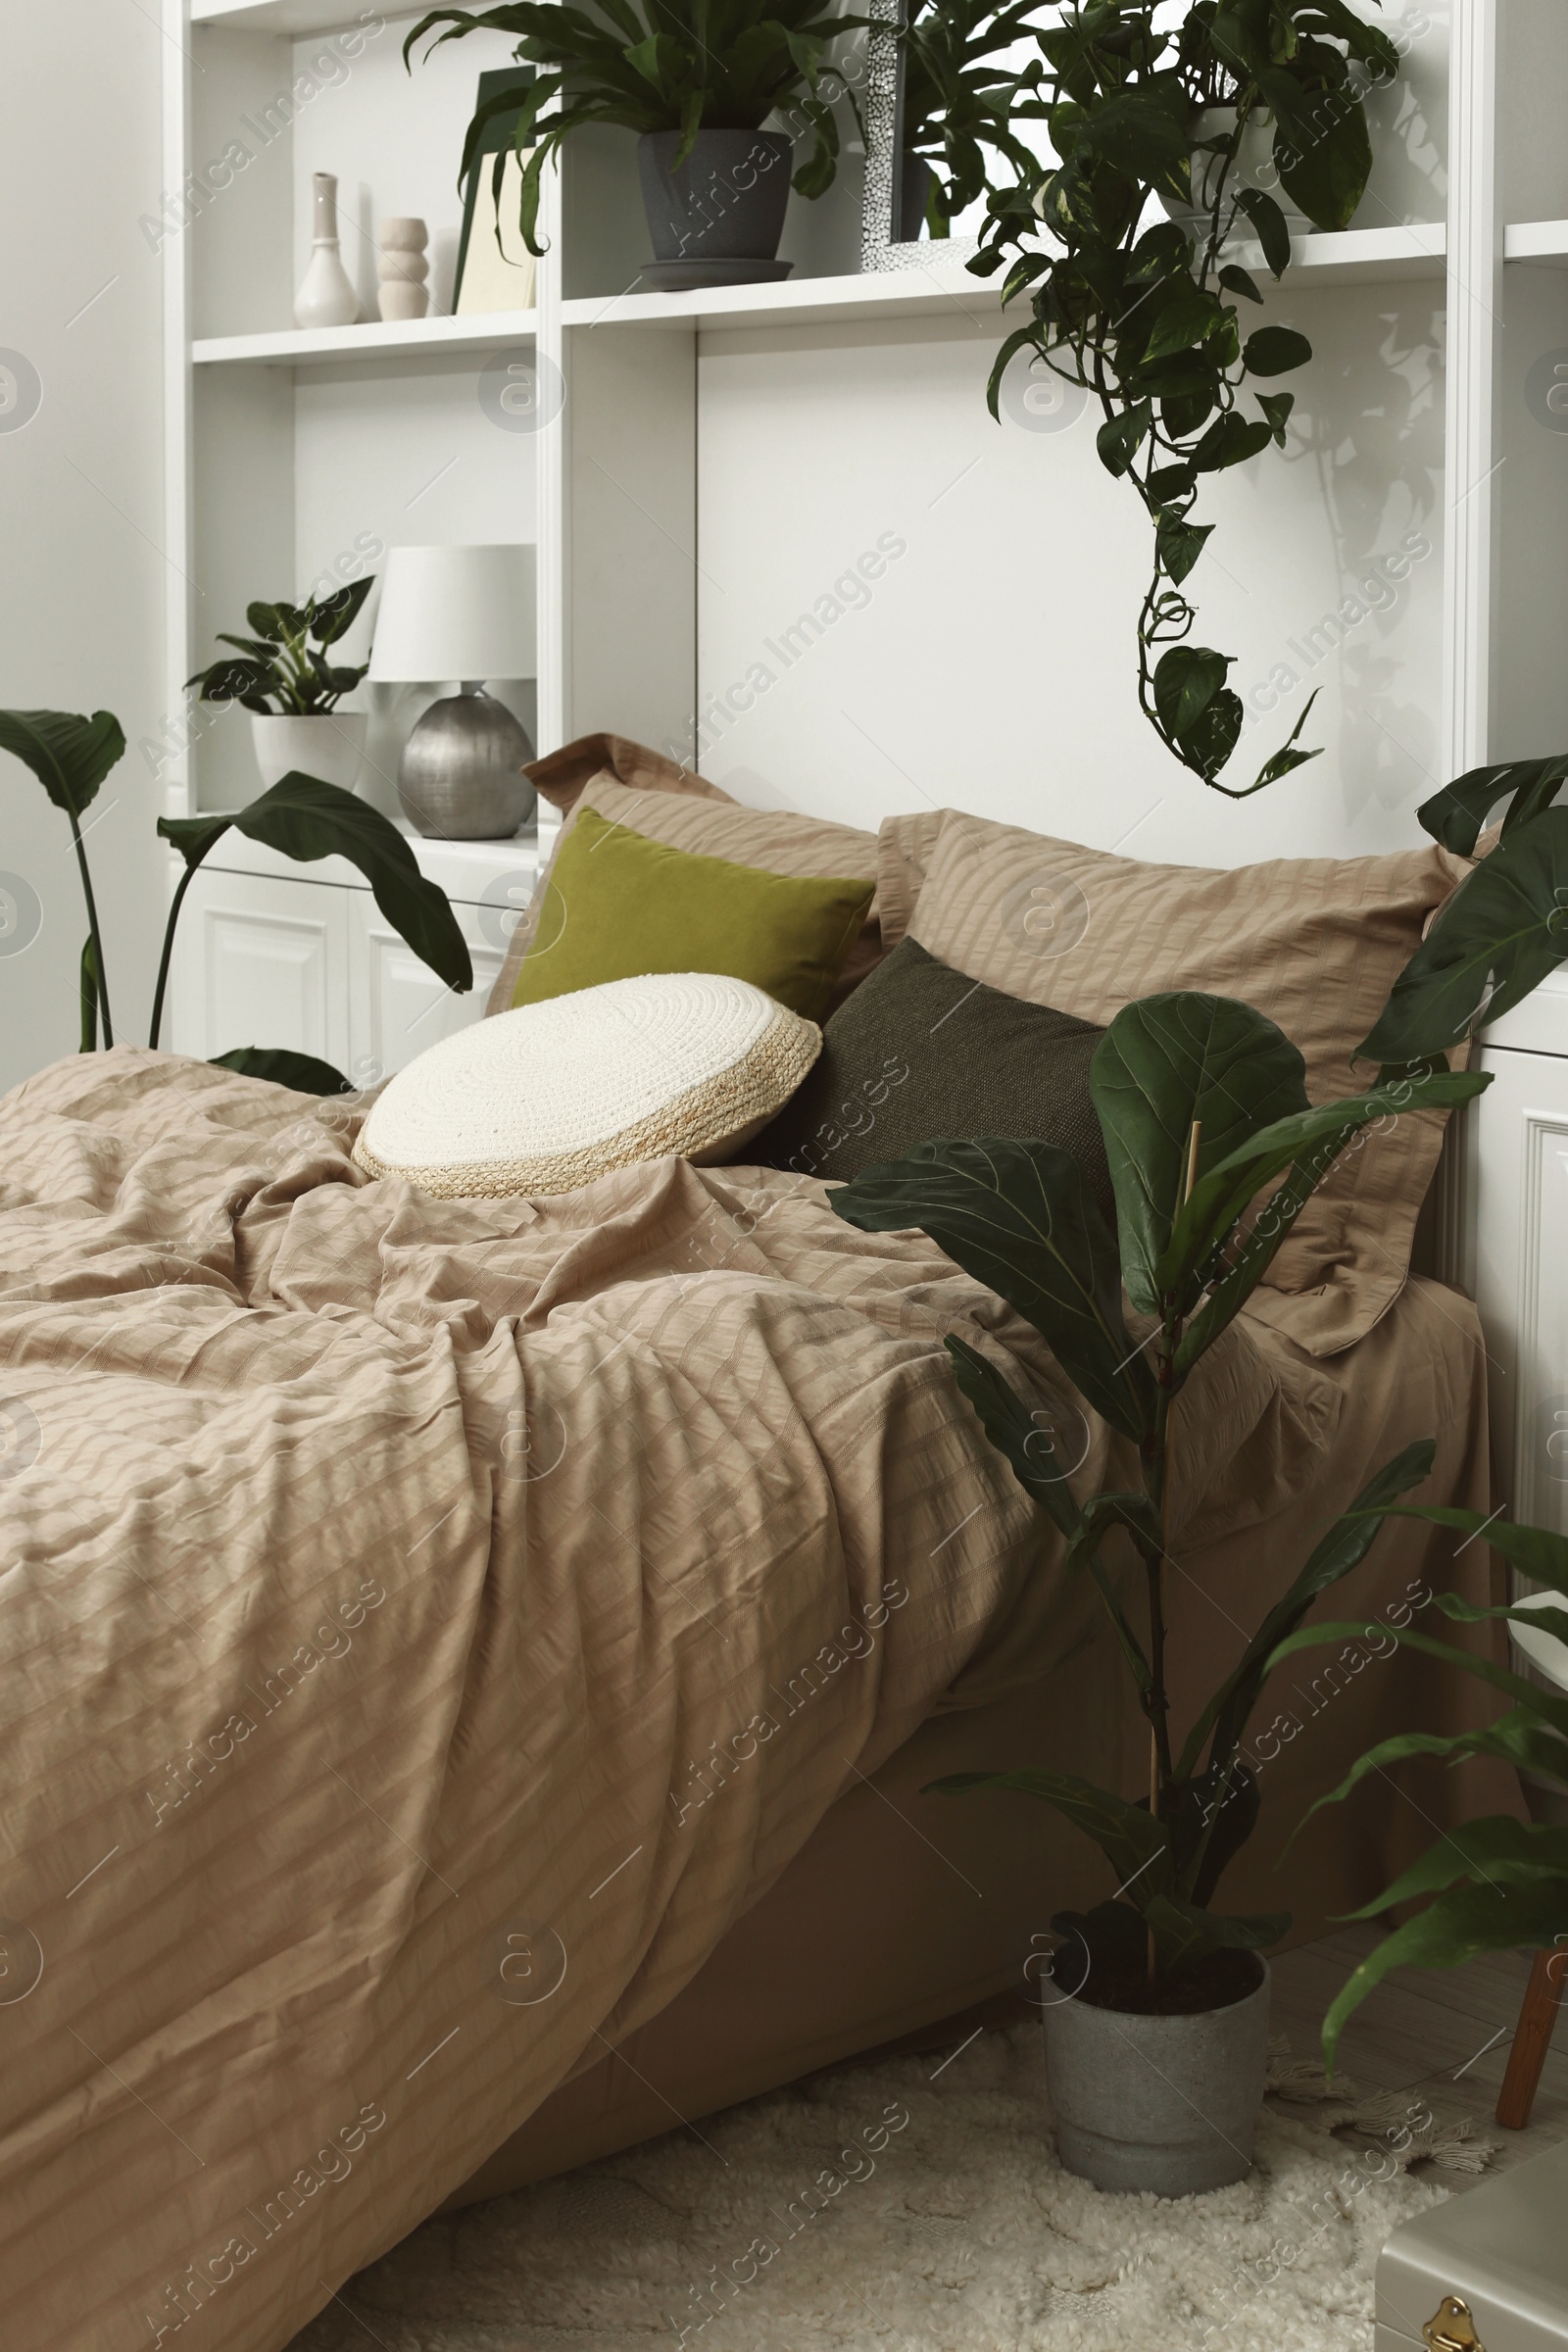 Photo of Comfortable bed and different houseplants in bedroom. Interior design